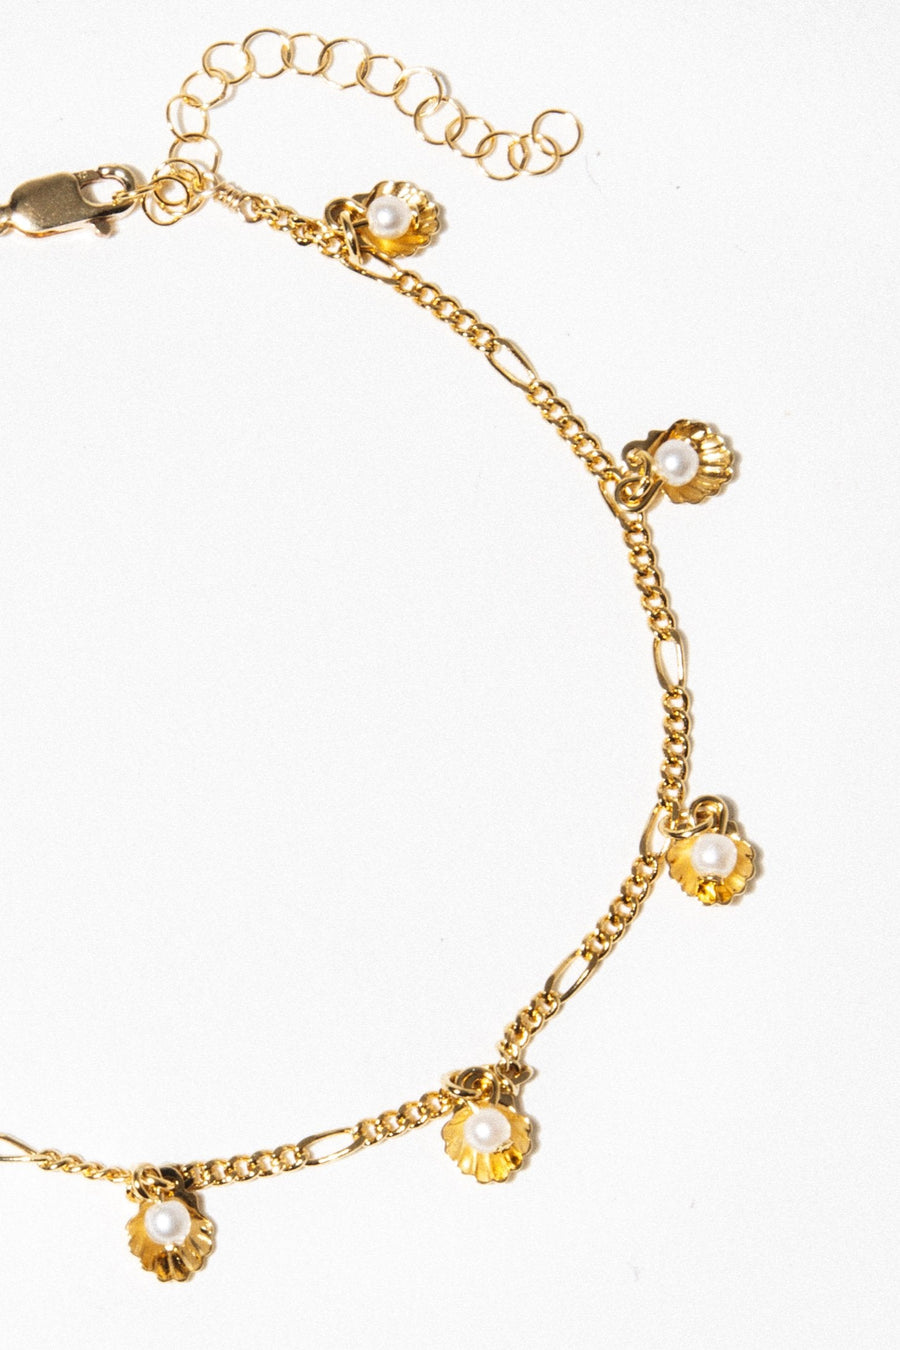 Goddess Jewelry Gold Pinnidea Anklet